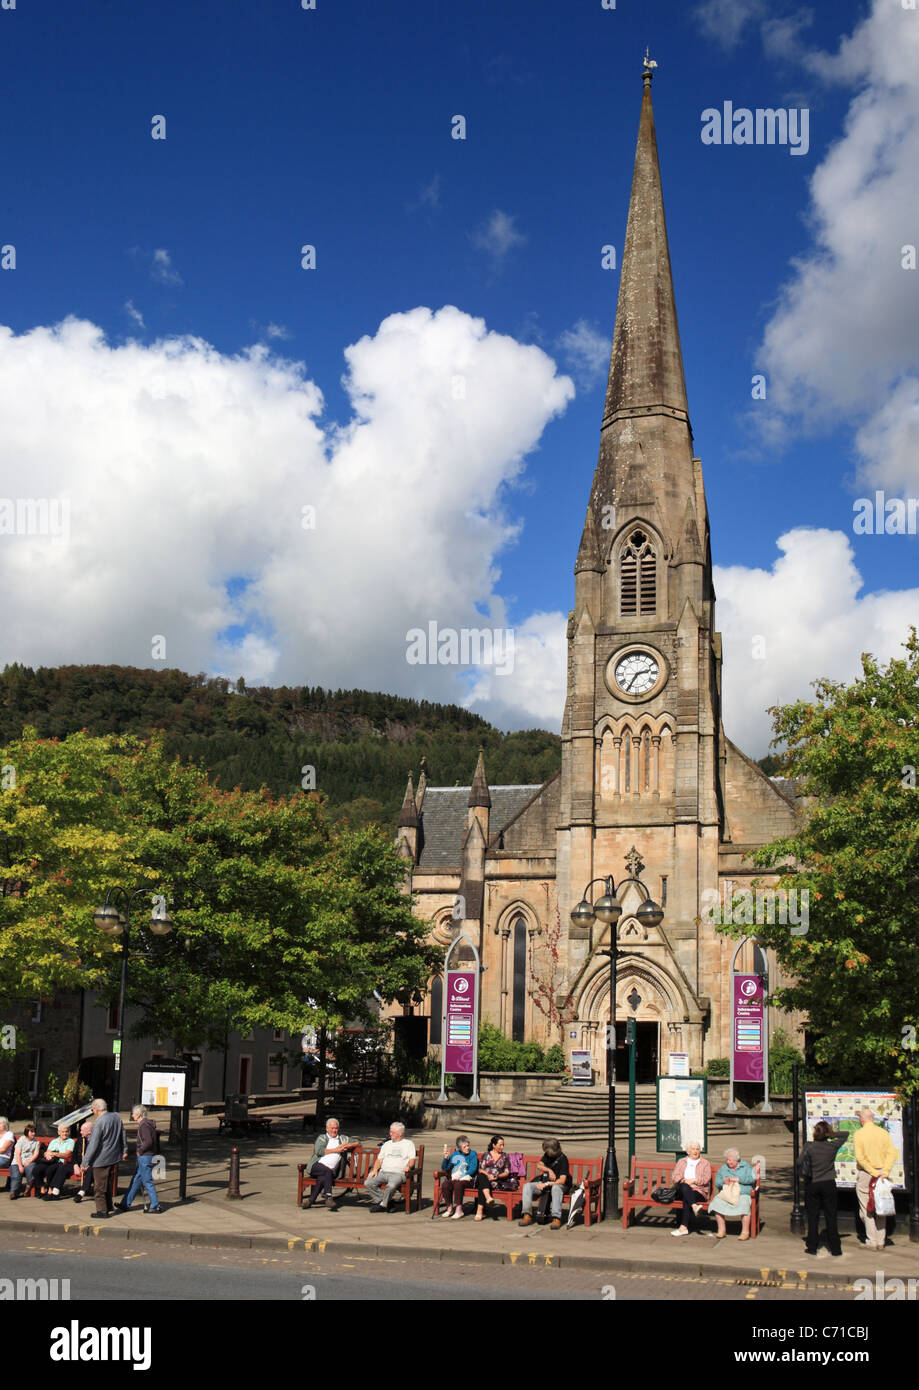 People sitting in front of Callander tourist information and Rob Roy centre, Stirling, Scotland. Stock Photo